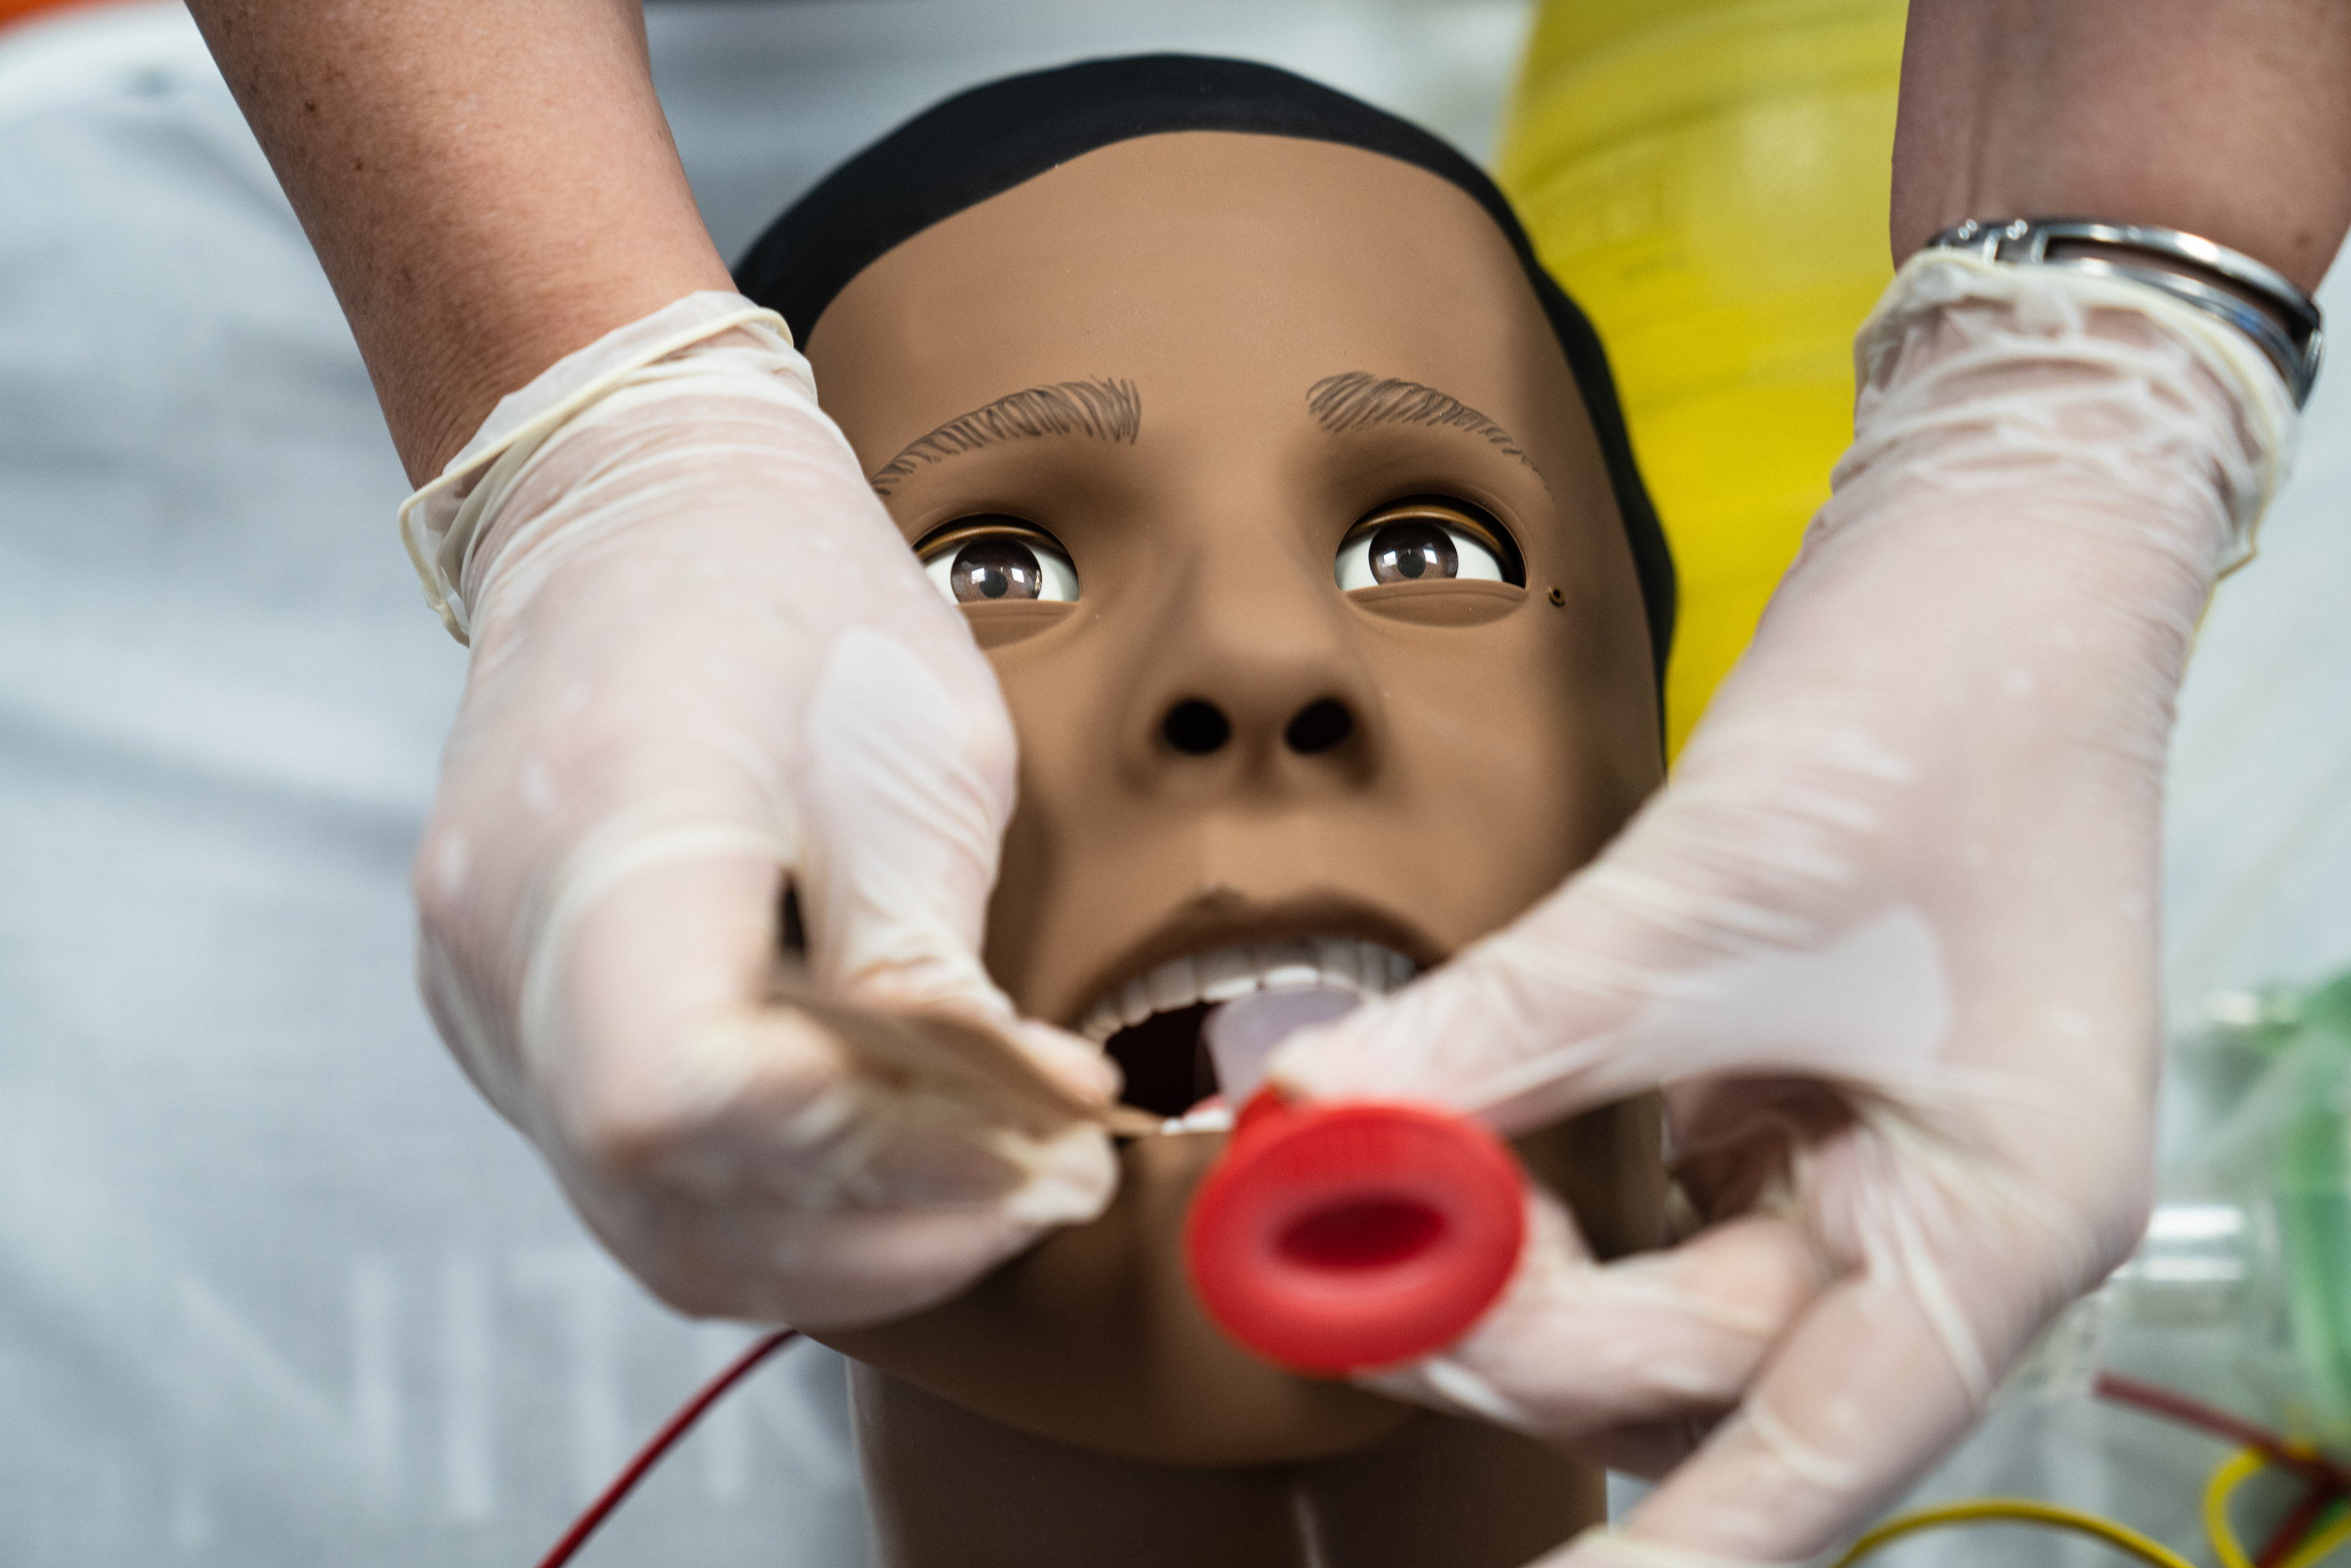 Airway management practice on a high-fidelity simulator